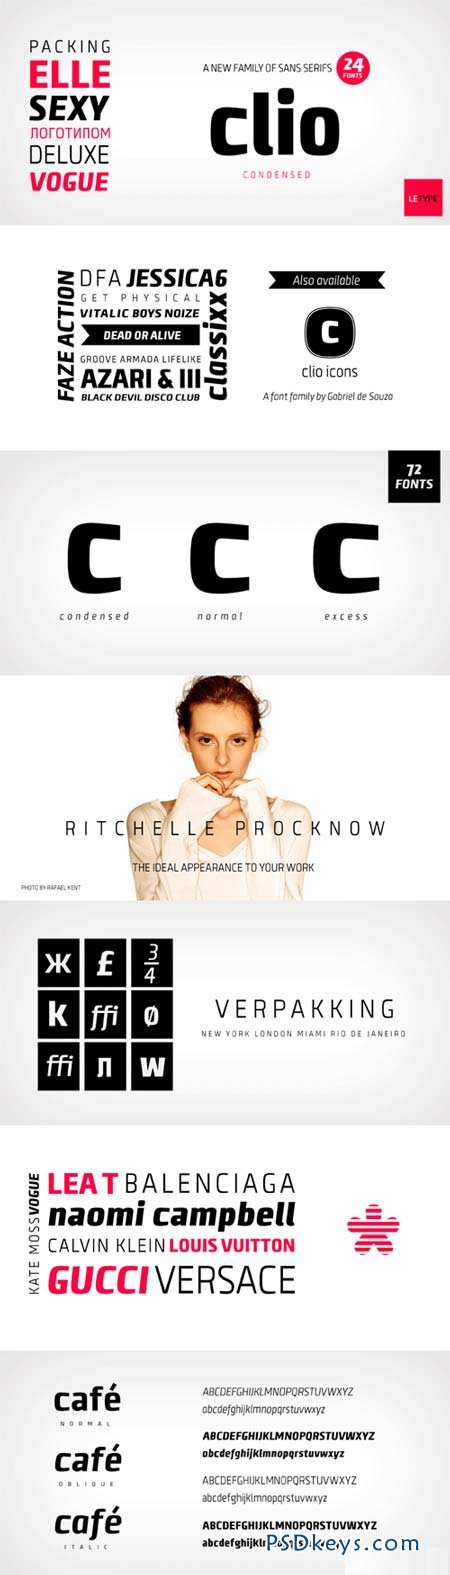 Clio Condensed Font Family - 24 Fonts for $389